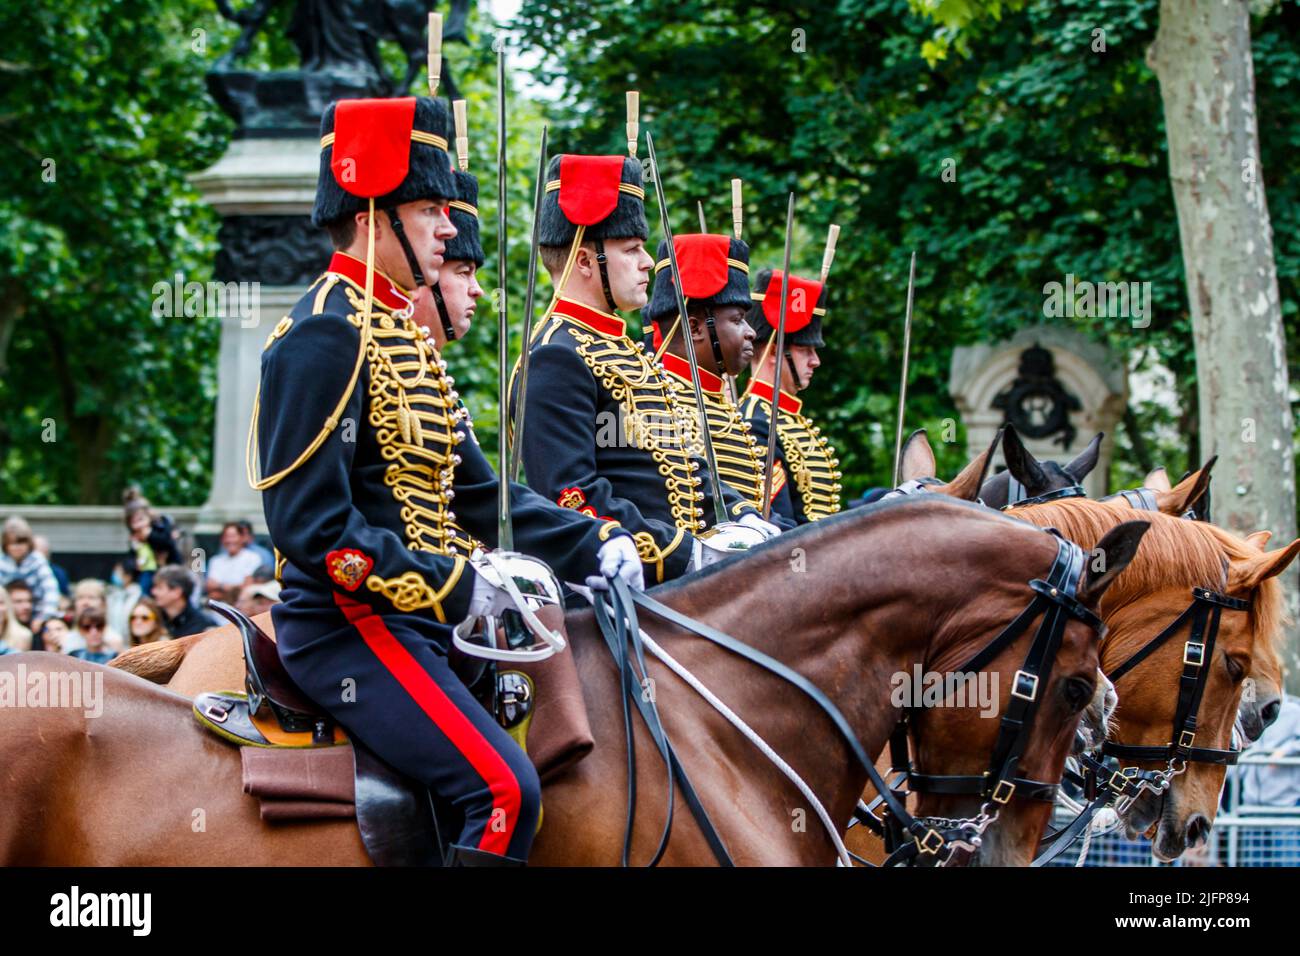 The King’s Truppe, Royal Horse Artillery at Trooping the Color, Colonel’s Review in the Mall, London, England, Großbritannien am Samstag, den 28. Mai 202 Stockfoto